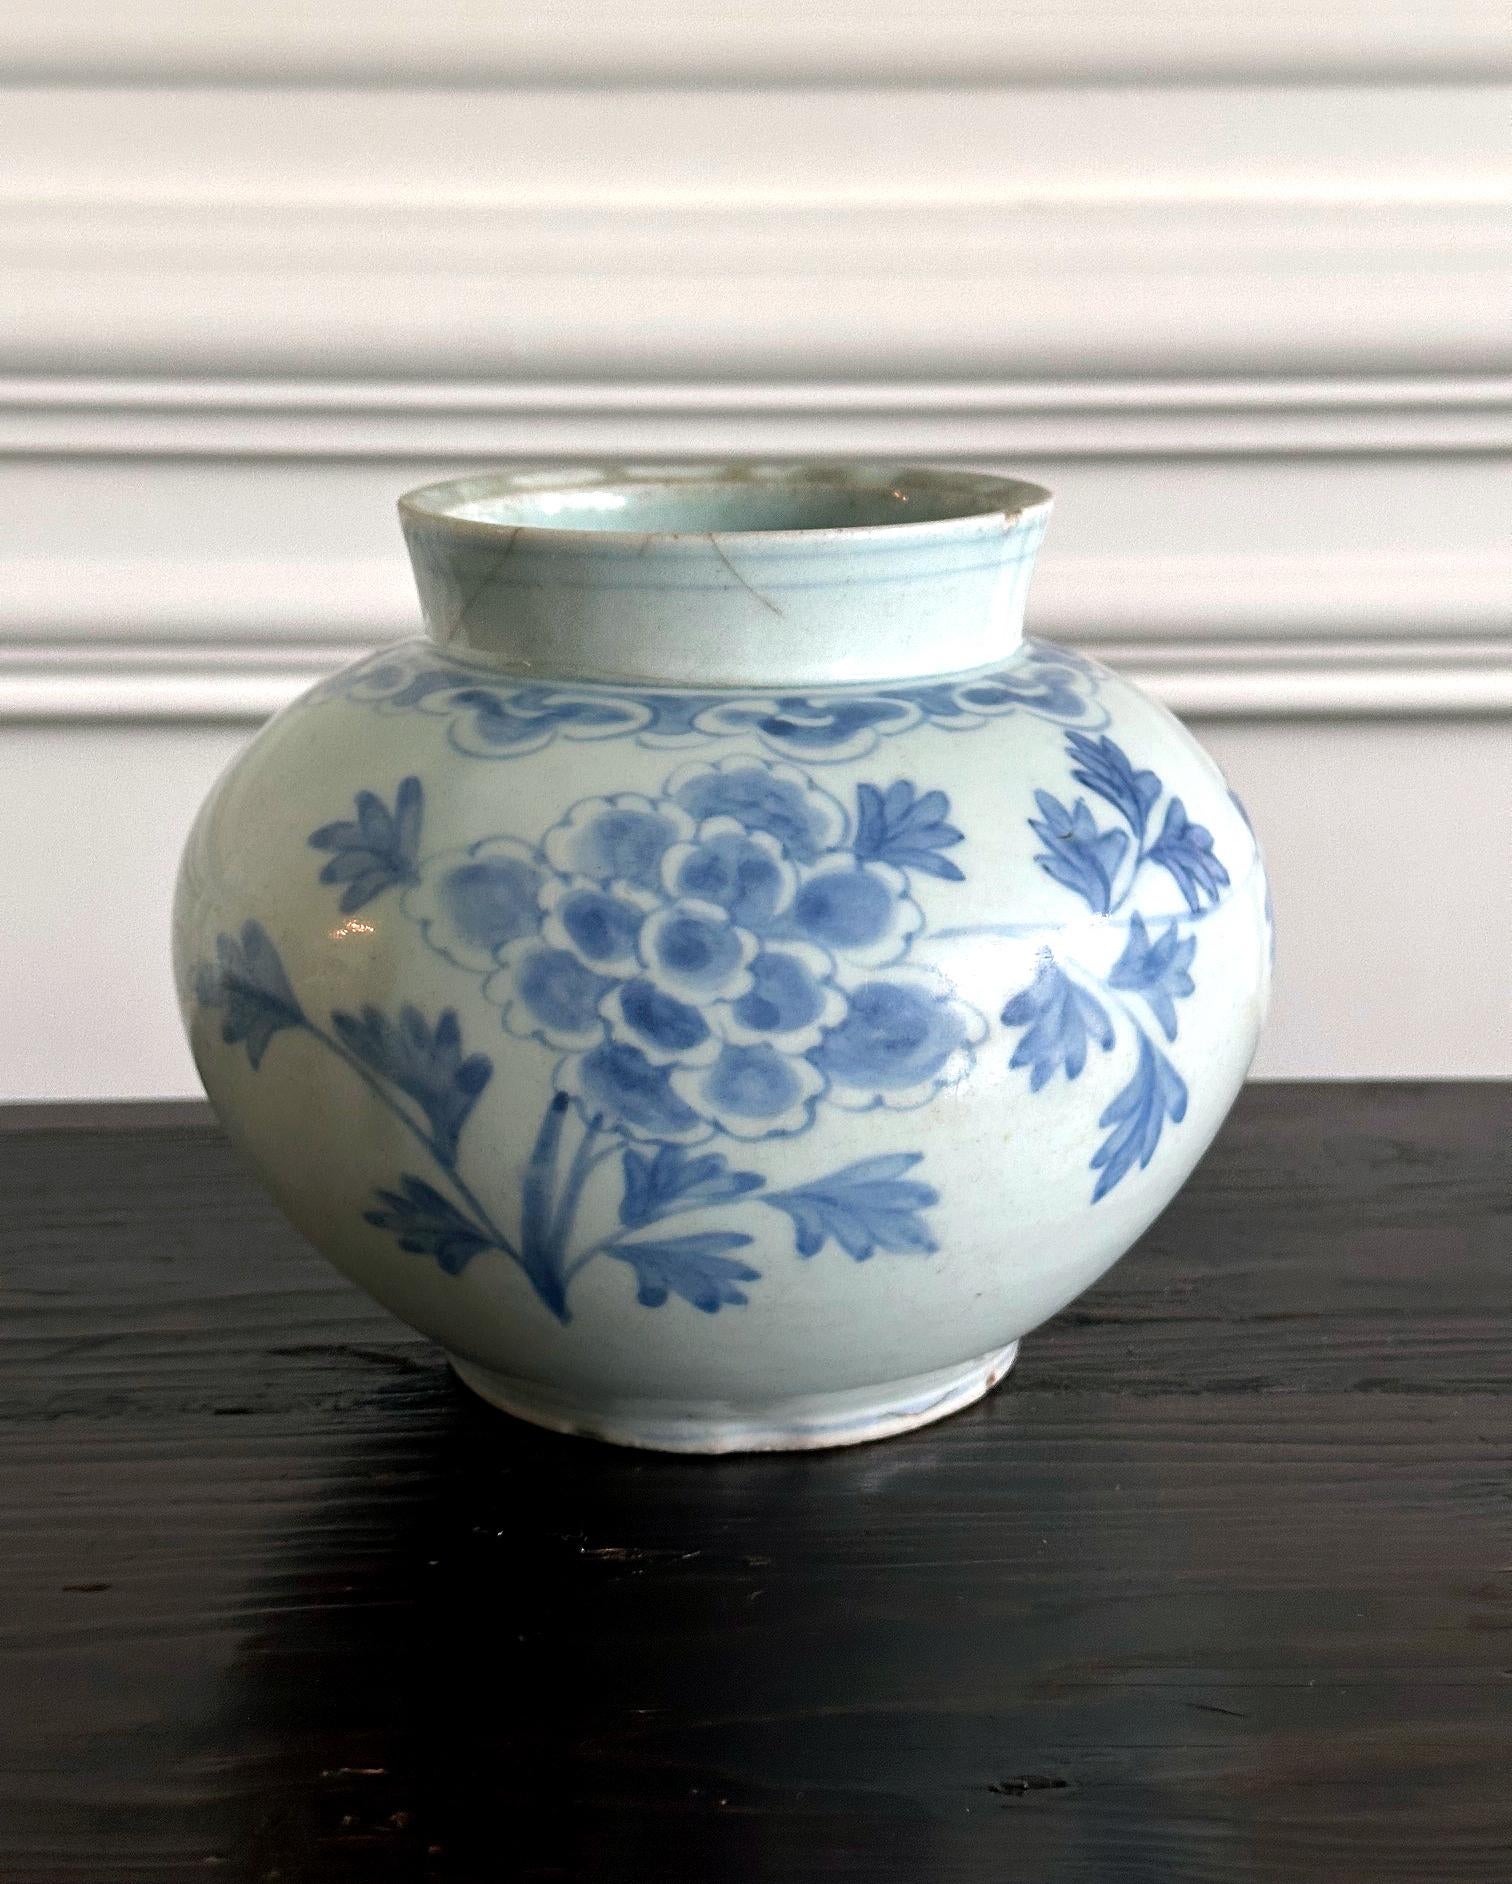 A Korean white porcelain jar with underglaze blue painting of large peonies with leaves circa second half of 19th century, Joseon Dynasty. Considered associated with Punwon-ri kilns in Gwangju, these types of globular jar with large mouth on a short